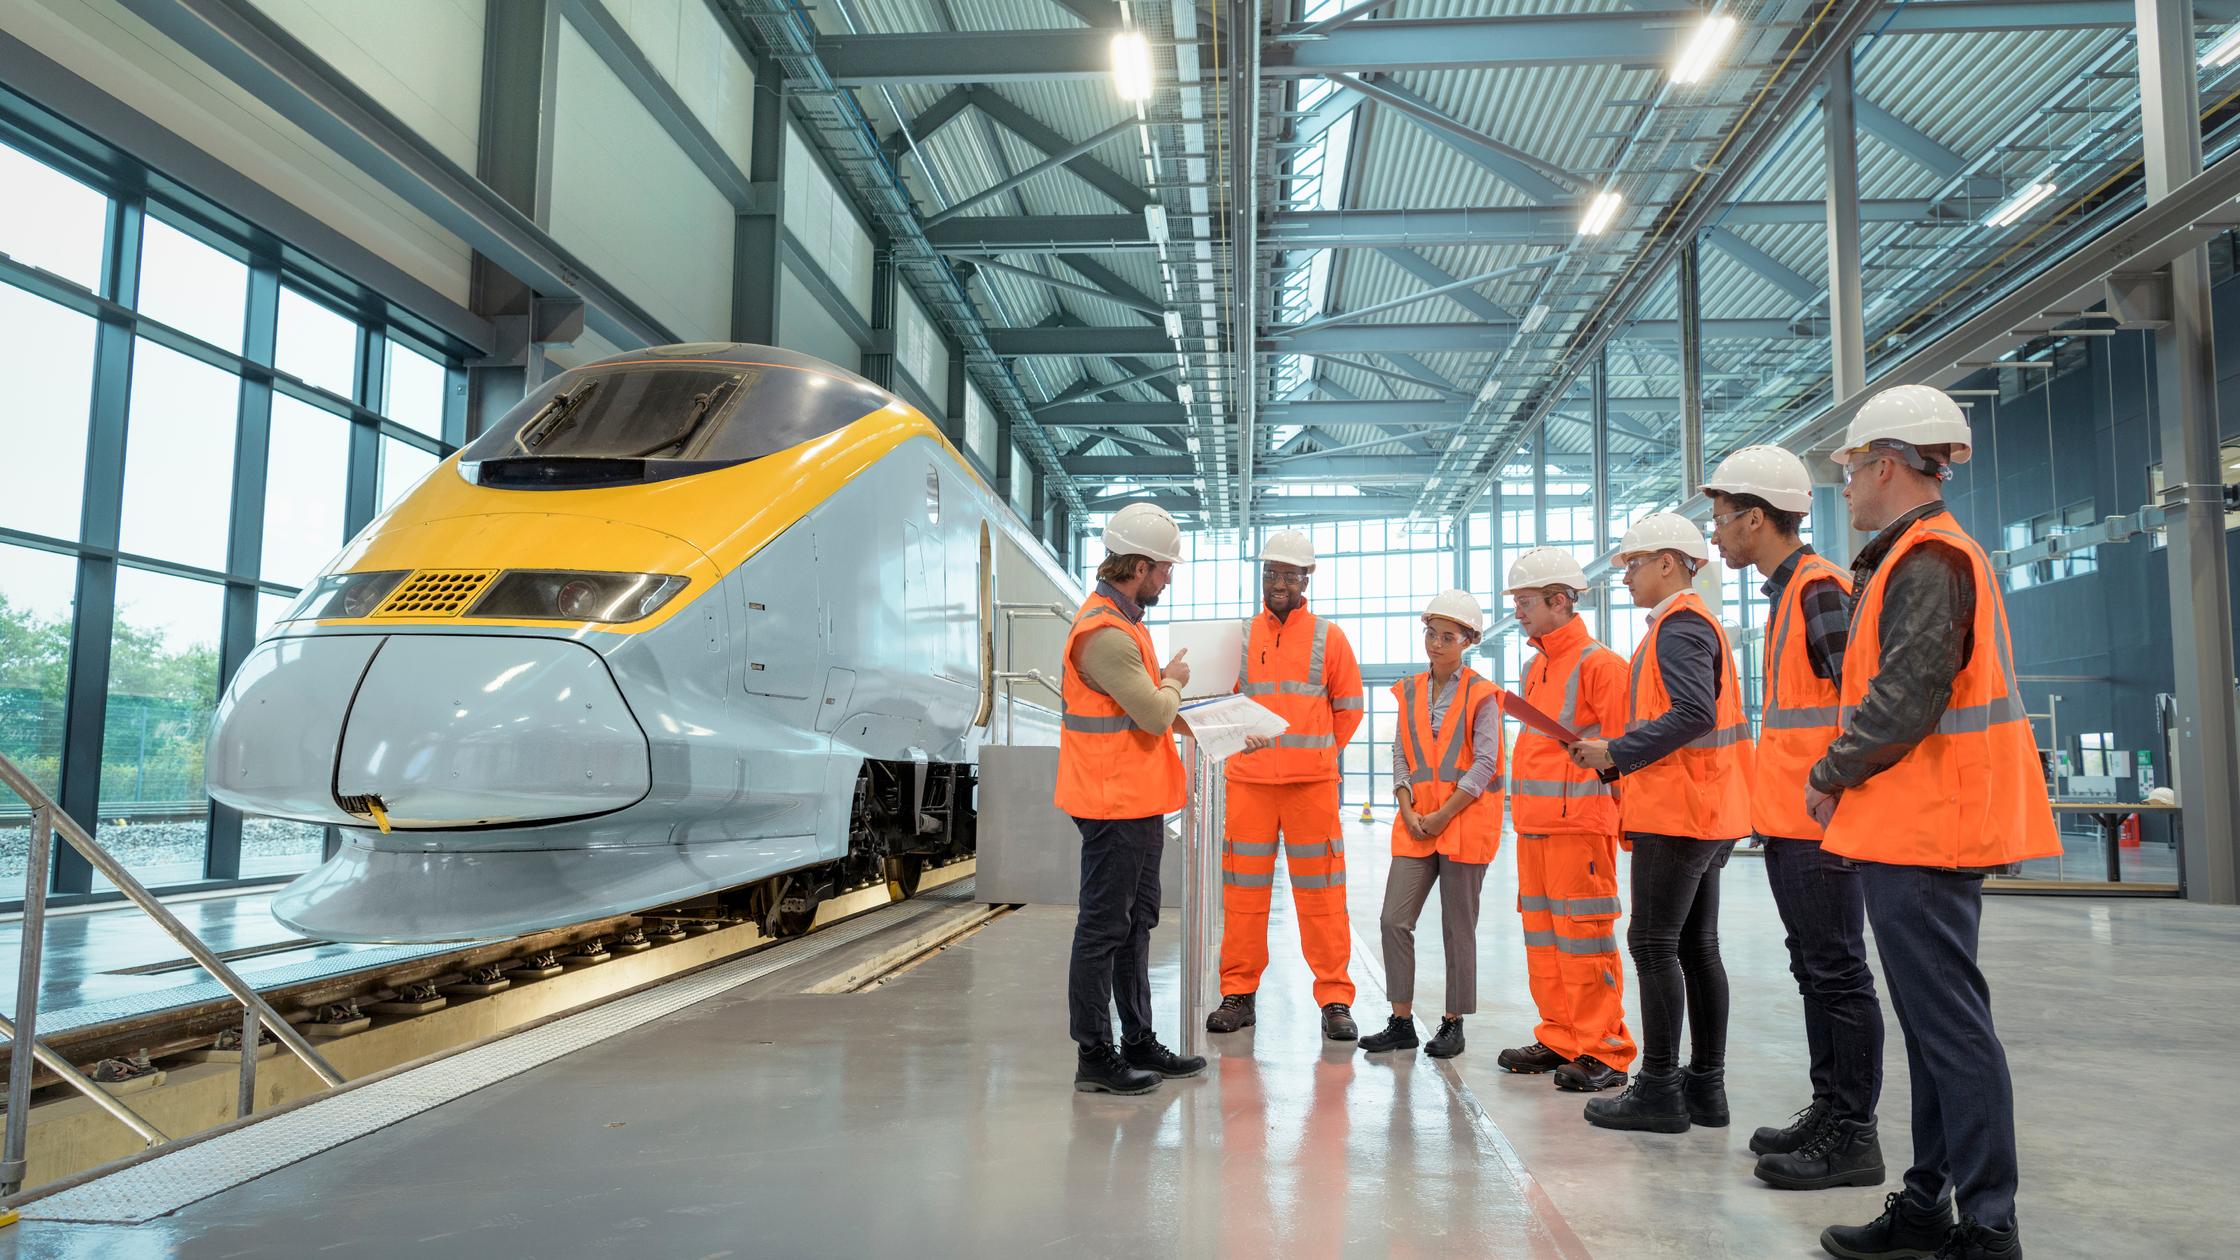 Innovation in Government - Teacher talking to apprentices at railway engineering facility